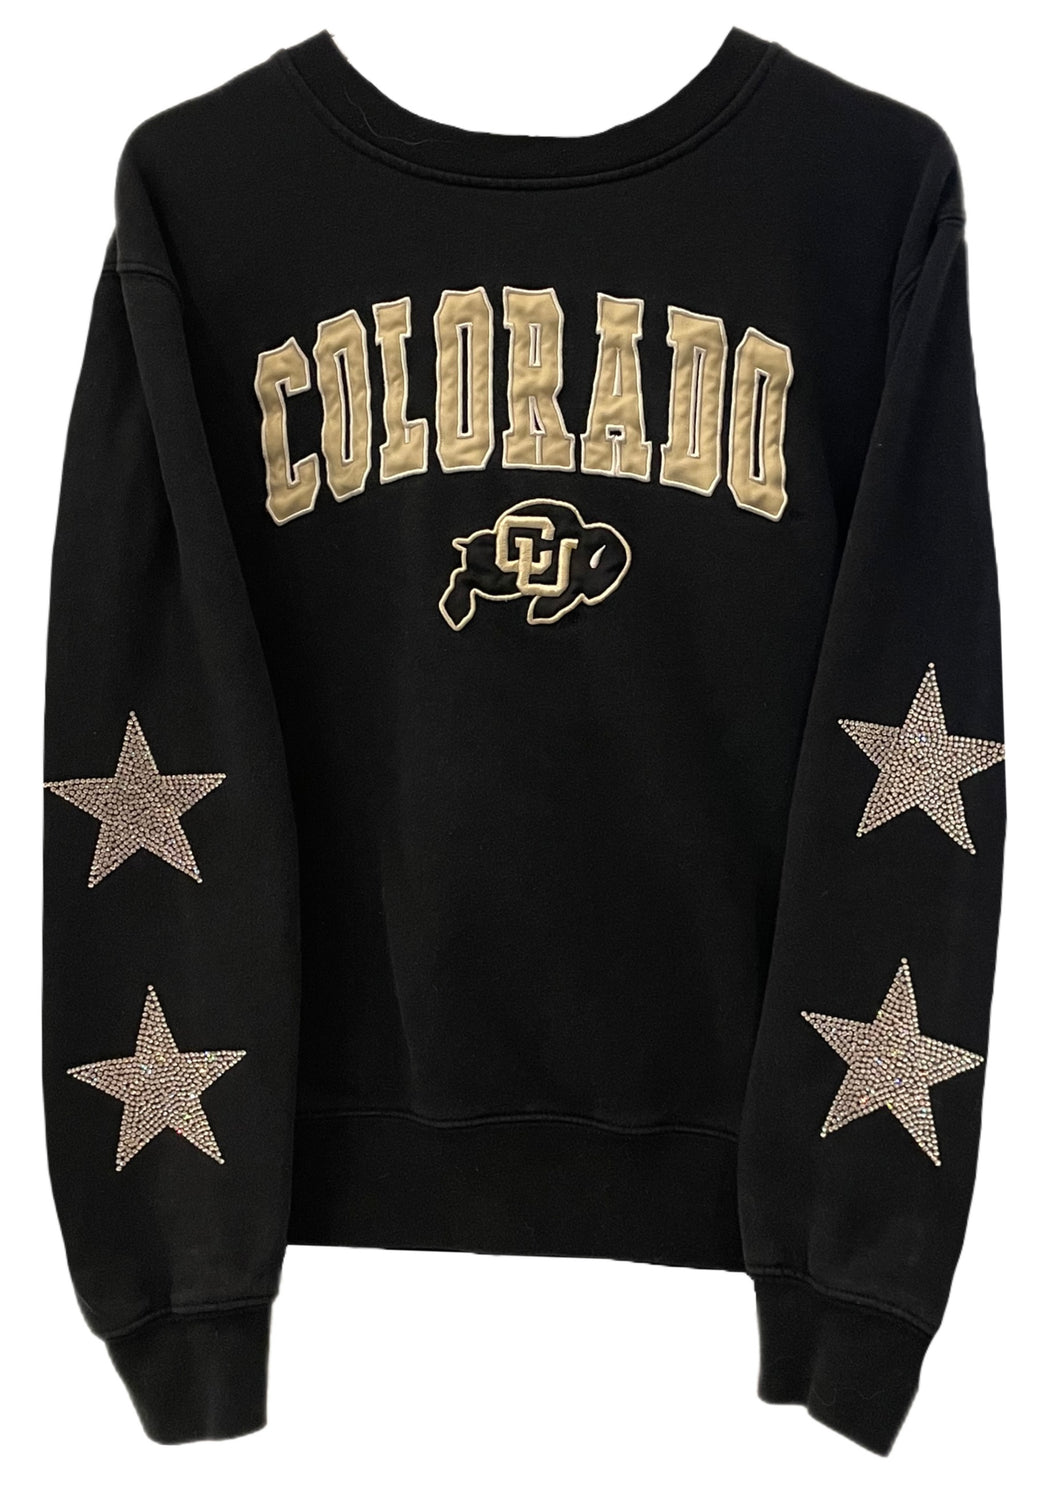 University of Colorado, One of a KIND Vintage Sweatshirt with Crystal Star Design.